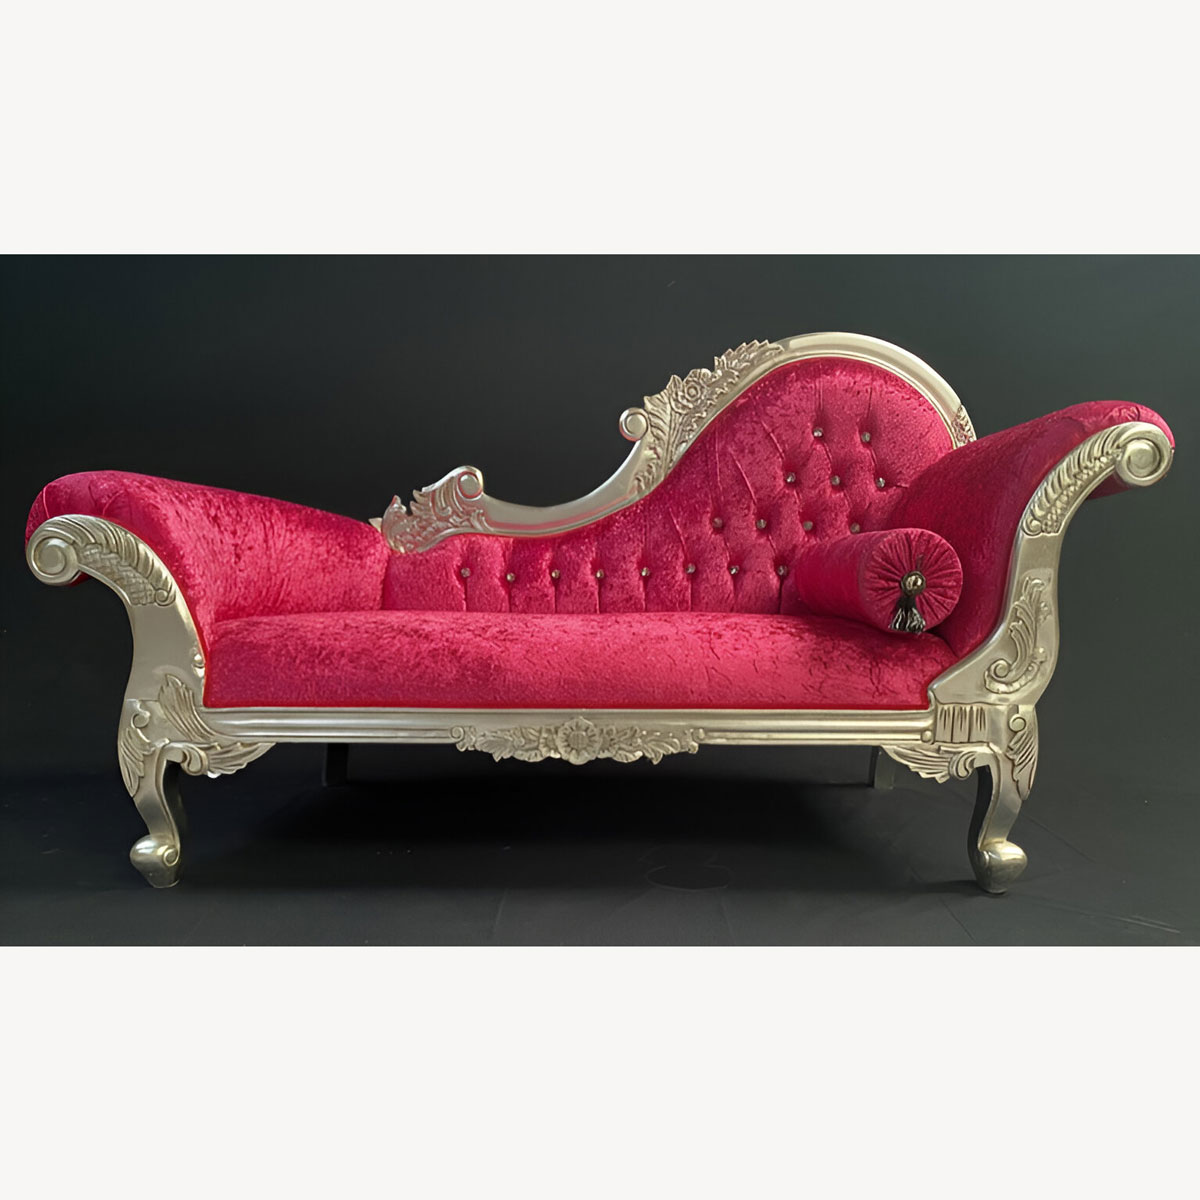 Chaise Hampshire Sofa In Silver Leaf Frame Upholstered In Fuchsia Pink Crushed Velvet With Crystal Buttoning 1 - Hampshire Barn Interiors - Chaise Hampshire Sofa In Silver Leaf Frame Upholstered In Fuchsia Pink Crushed Velvet With Crystal Buttoning -